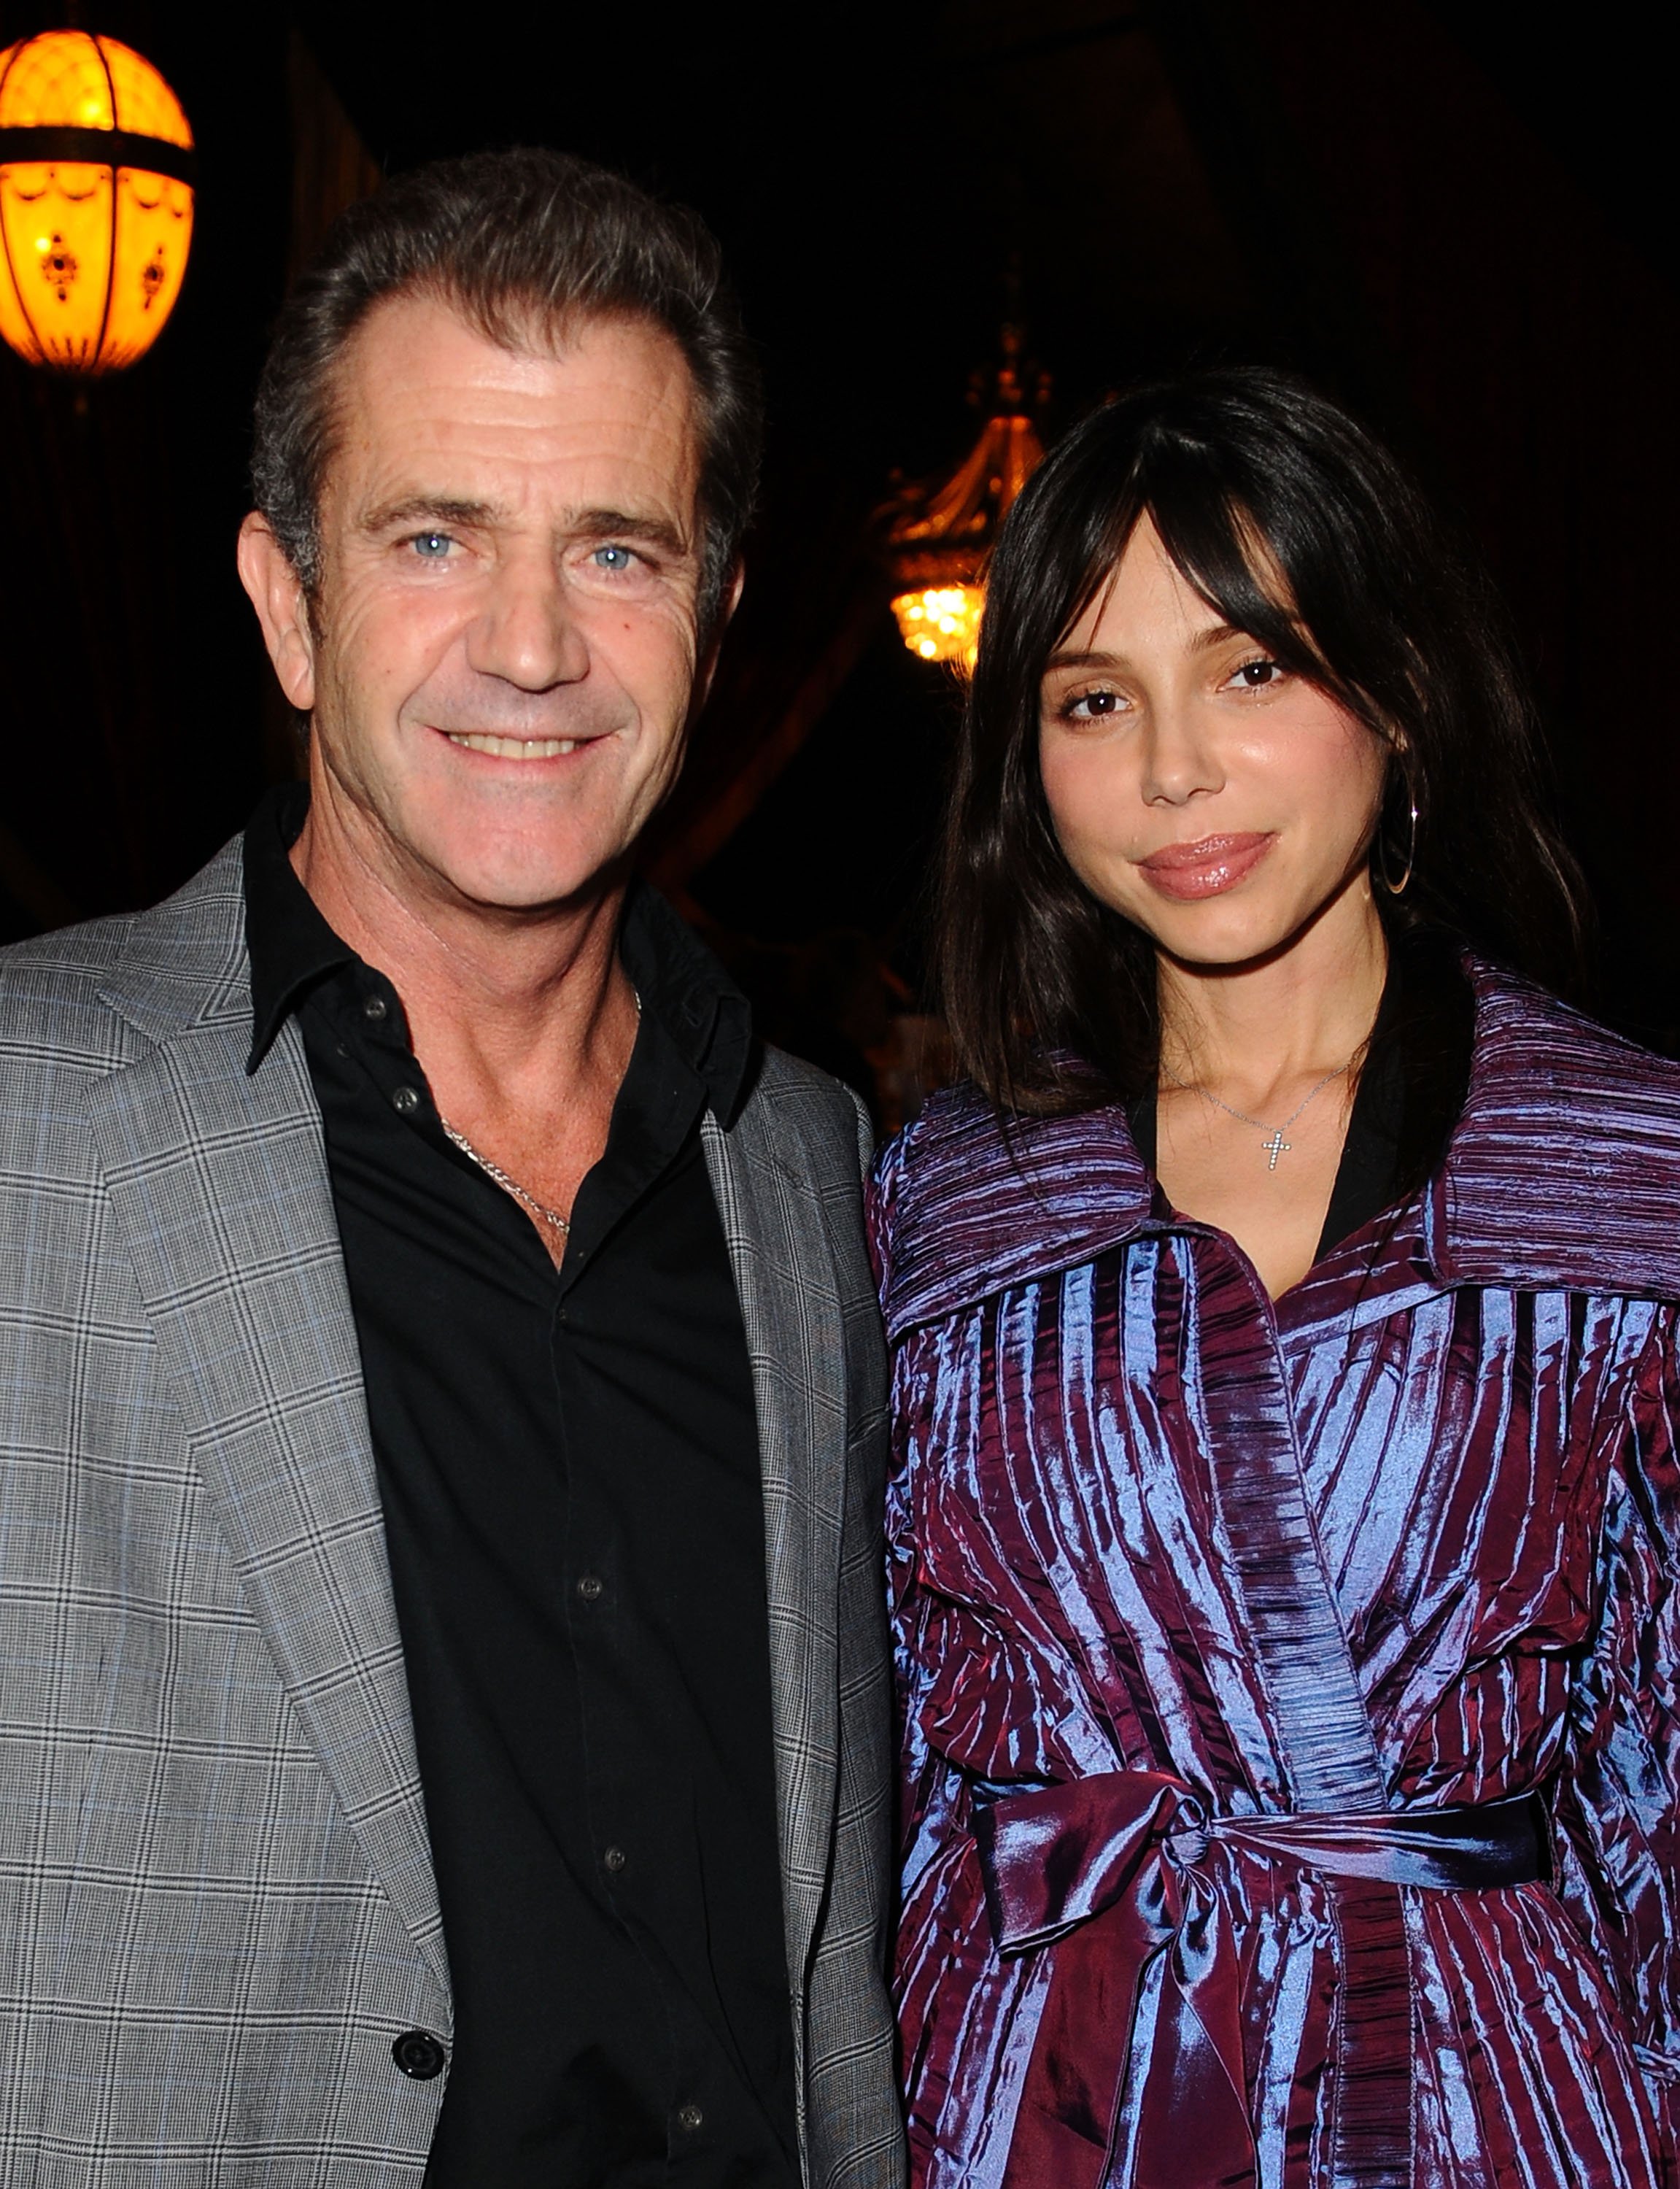 Mel Gibson and Oksana Grigorieva at the Chernobyl Children's Project International Benefit on February 11, 2010, in Studio City, California | Source: Getty Images